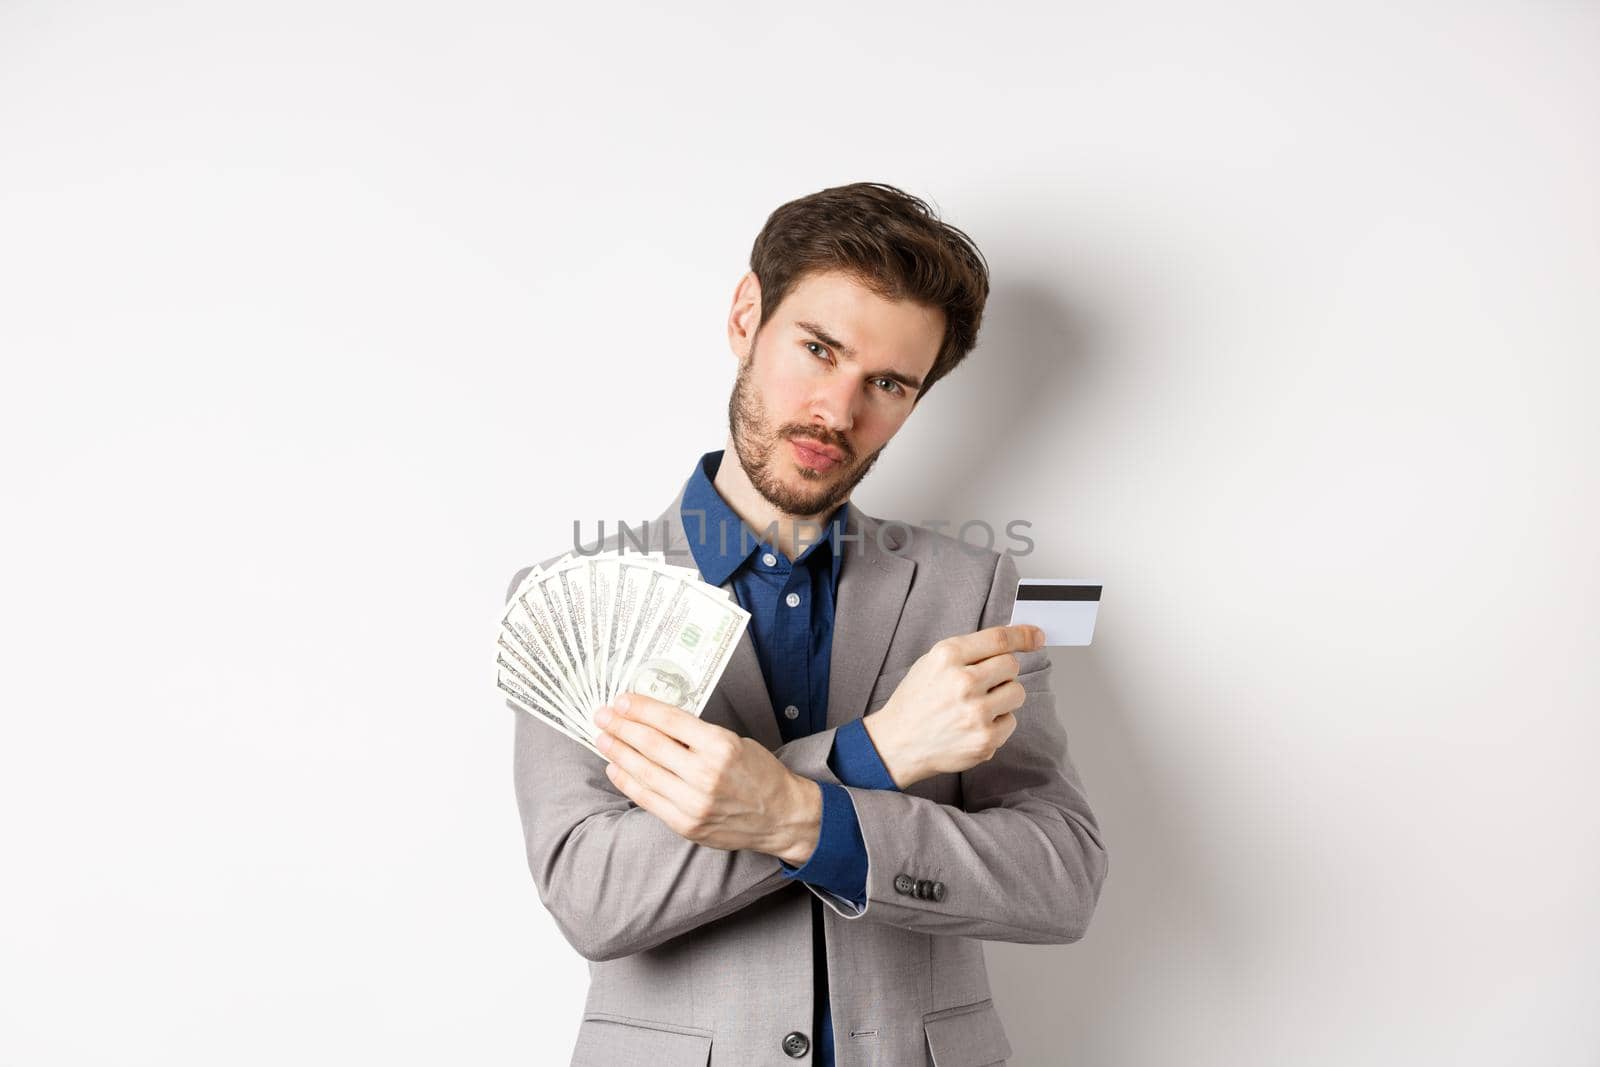 Cool young rich man in suit showing dollar bills and plastic credit card, making money, standing on white background.